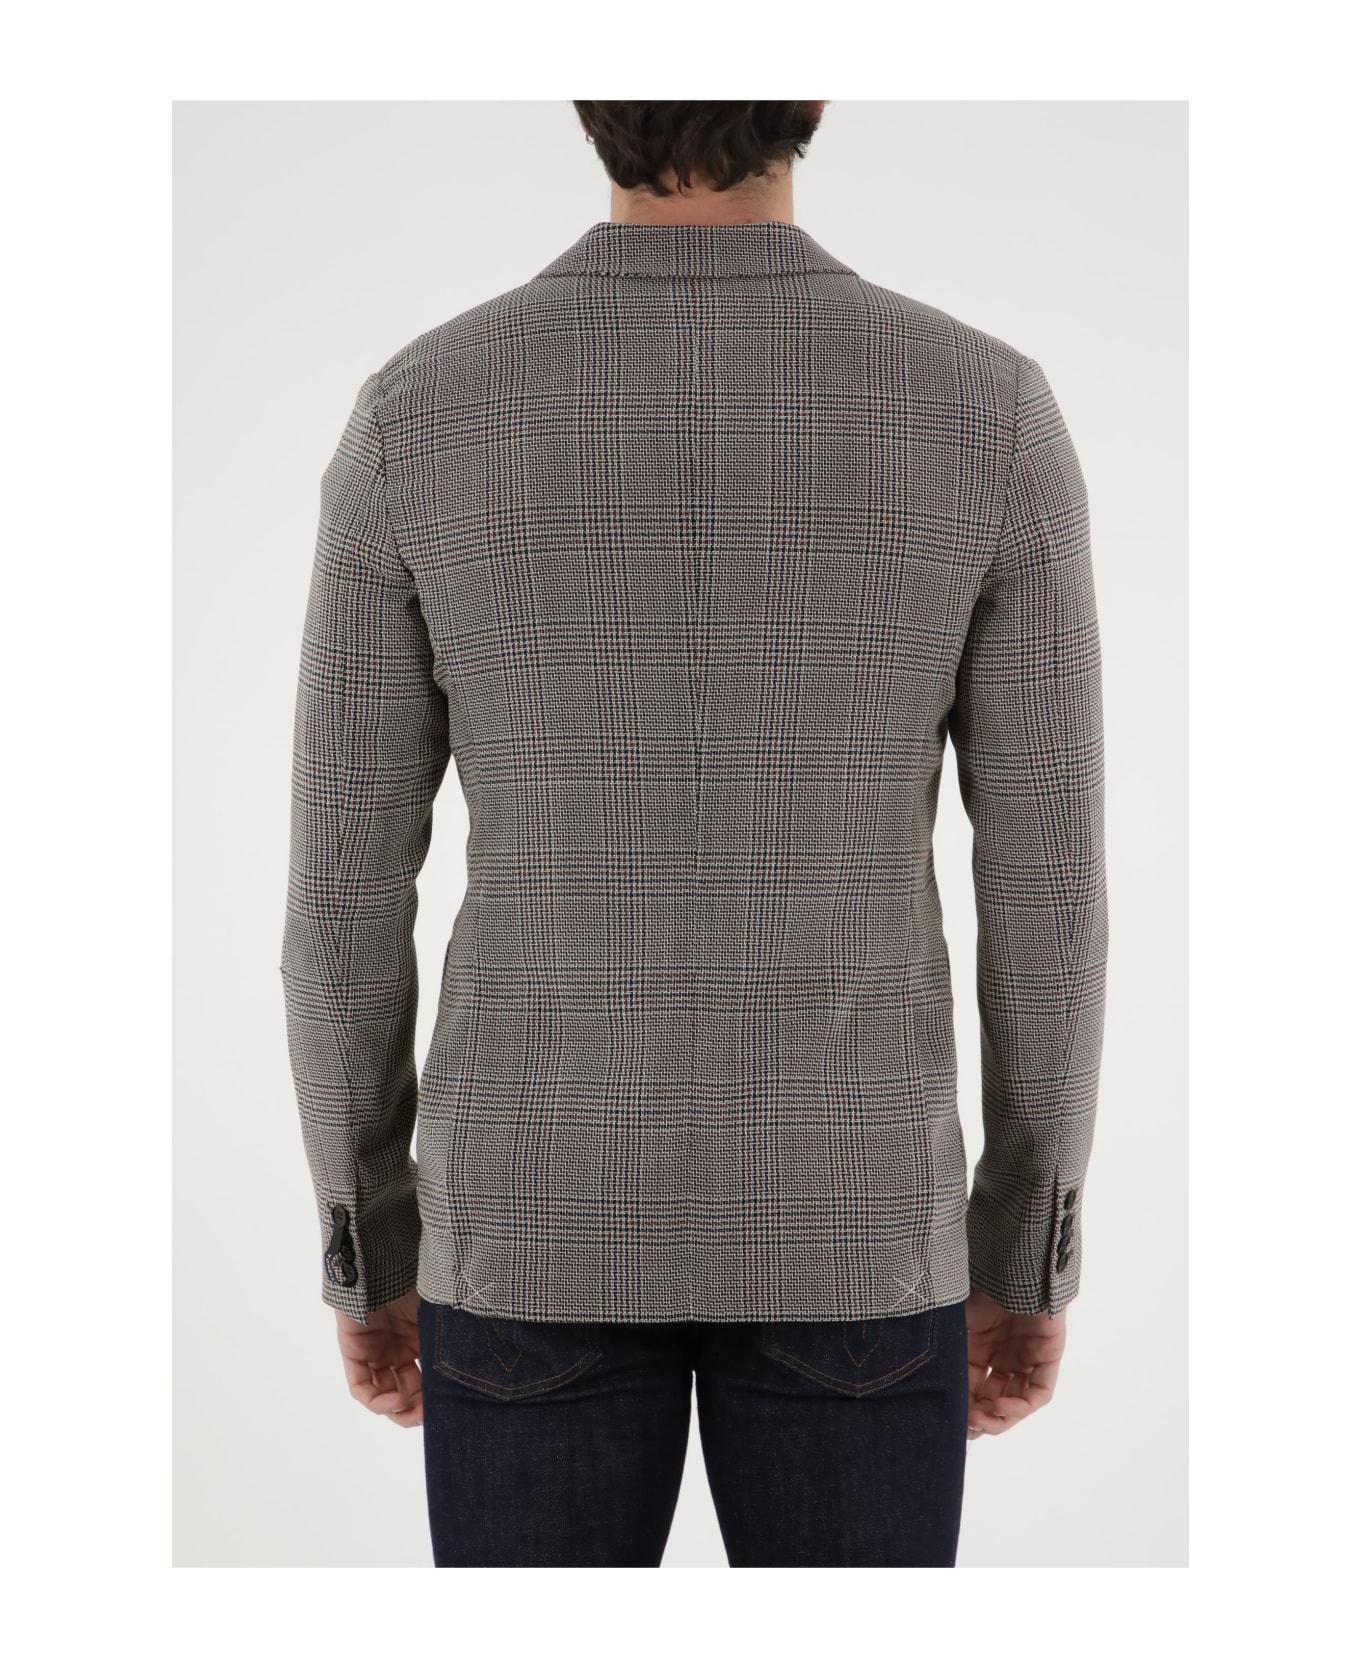 Tonello Double-breasted Glen Plaid Jacket - BEIGE ブレザー